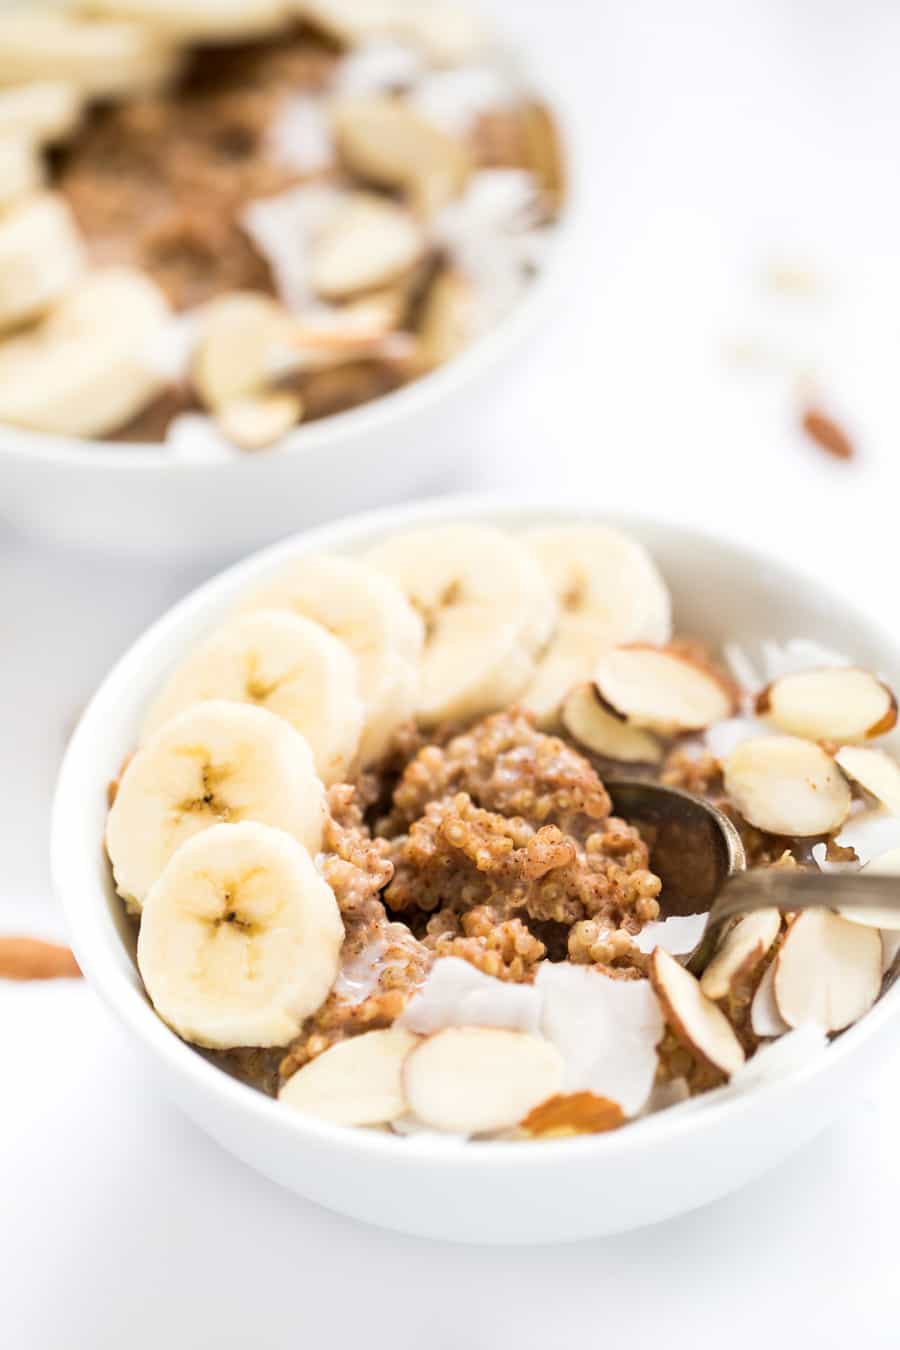 Kick start your day with these delicious quinoa power breakfast bowls! They're a cinch to make, are packed with protein and will keep you energized all day long!